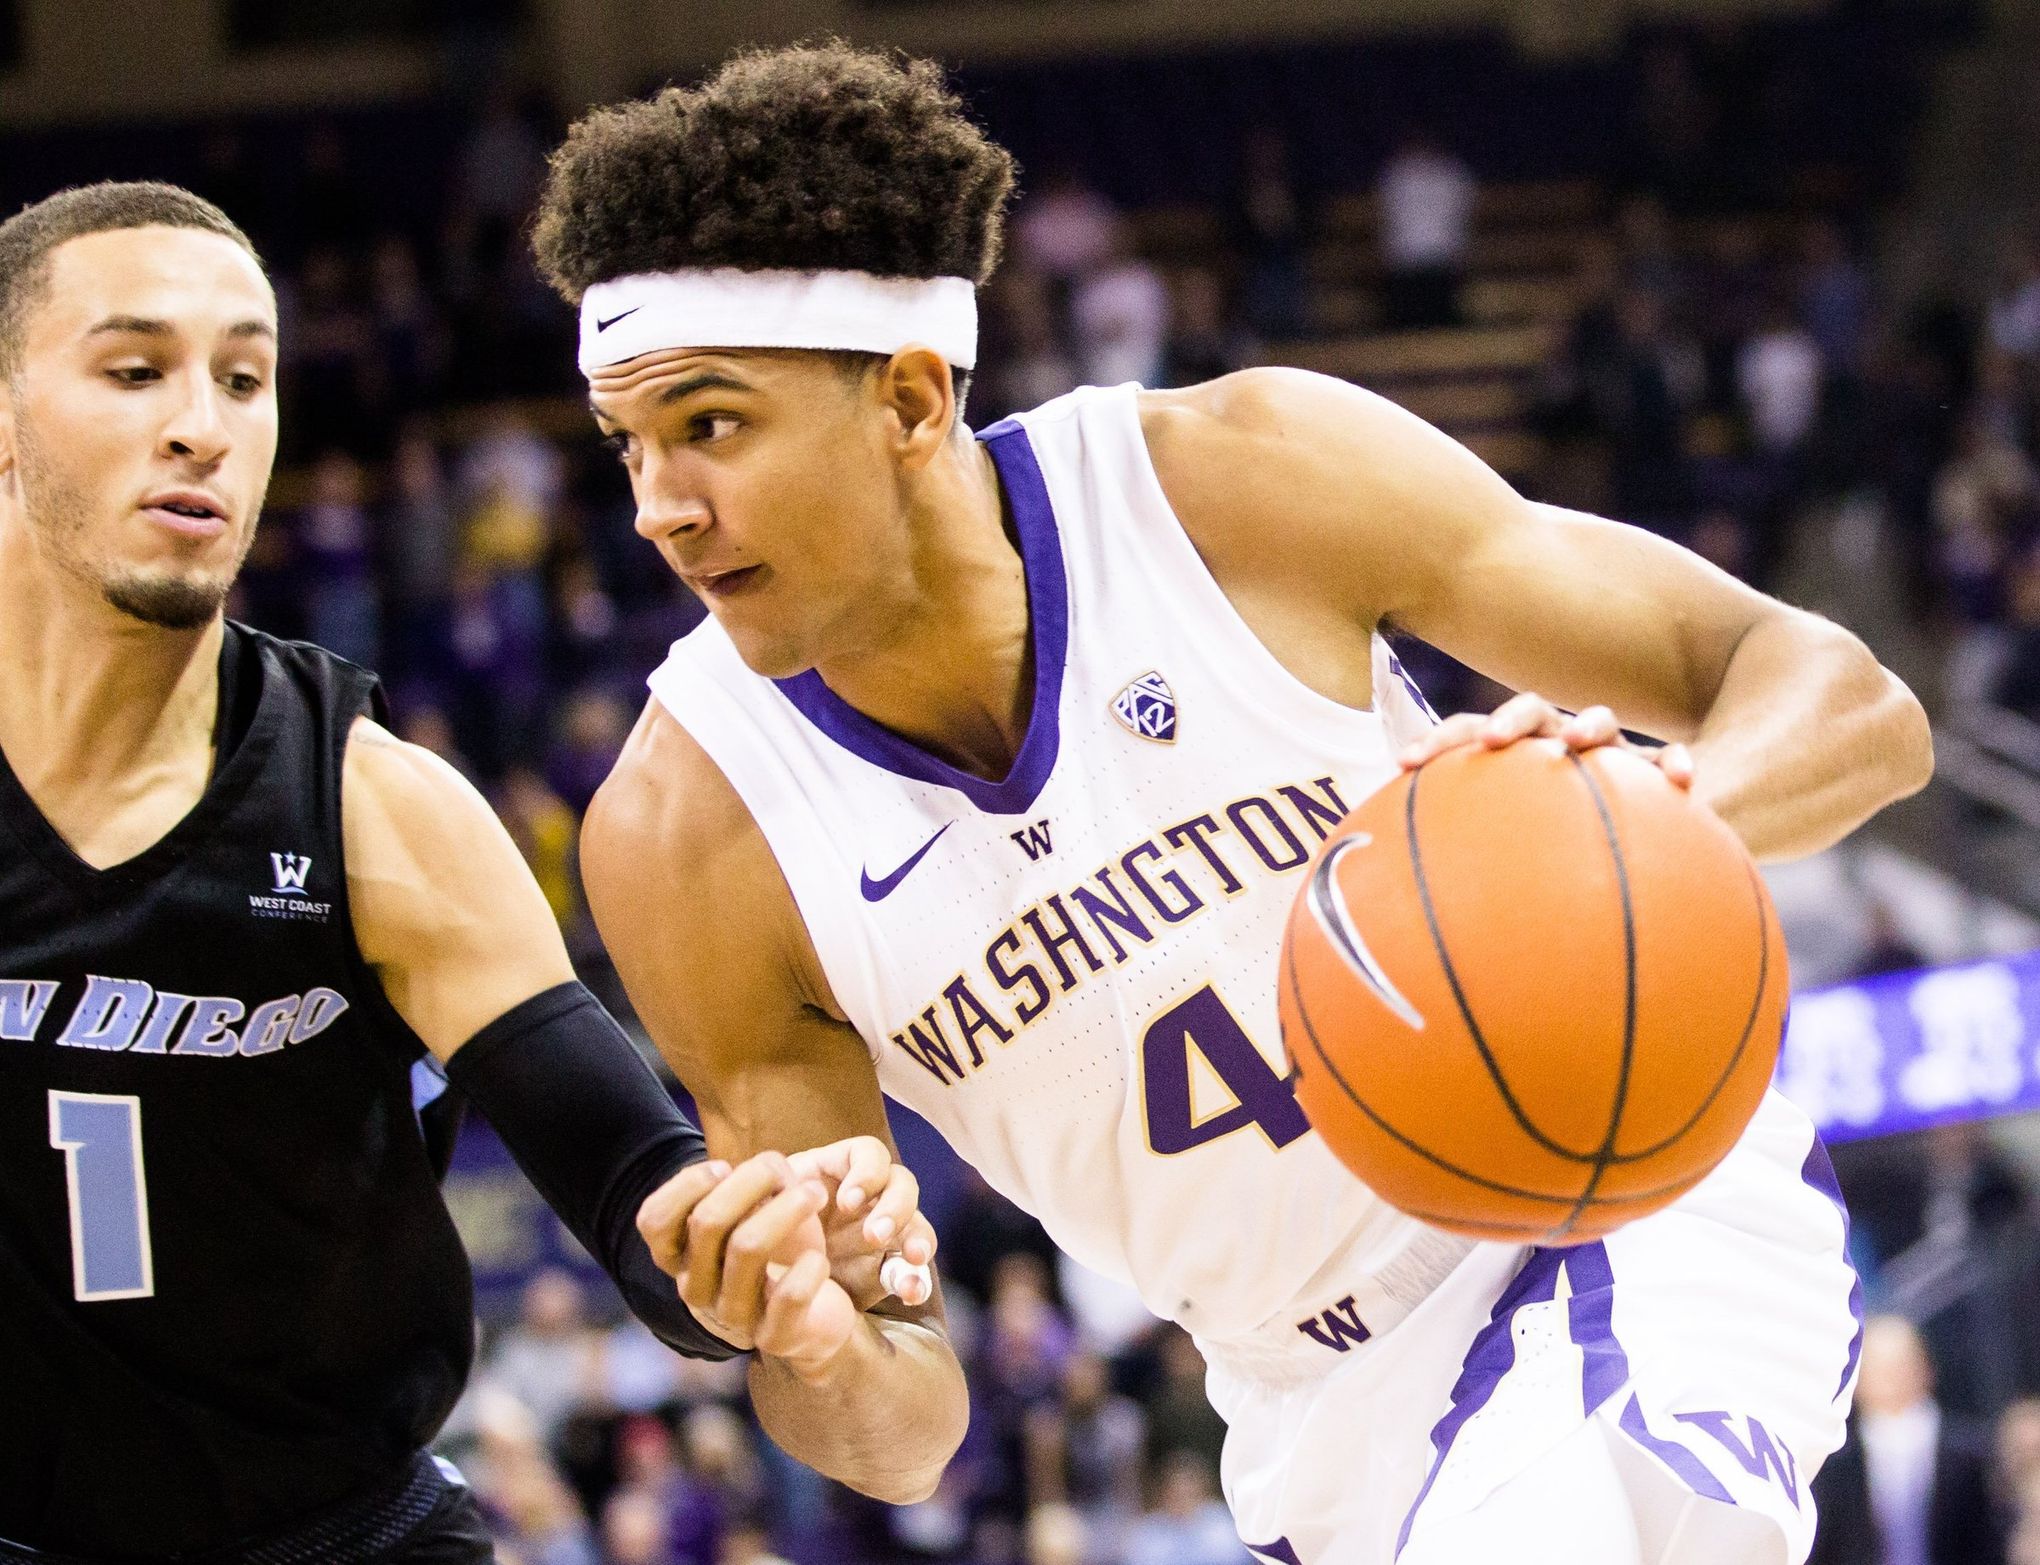 Matisse Thybulle shooting better off catch than he ever did in college